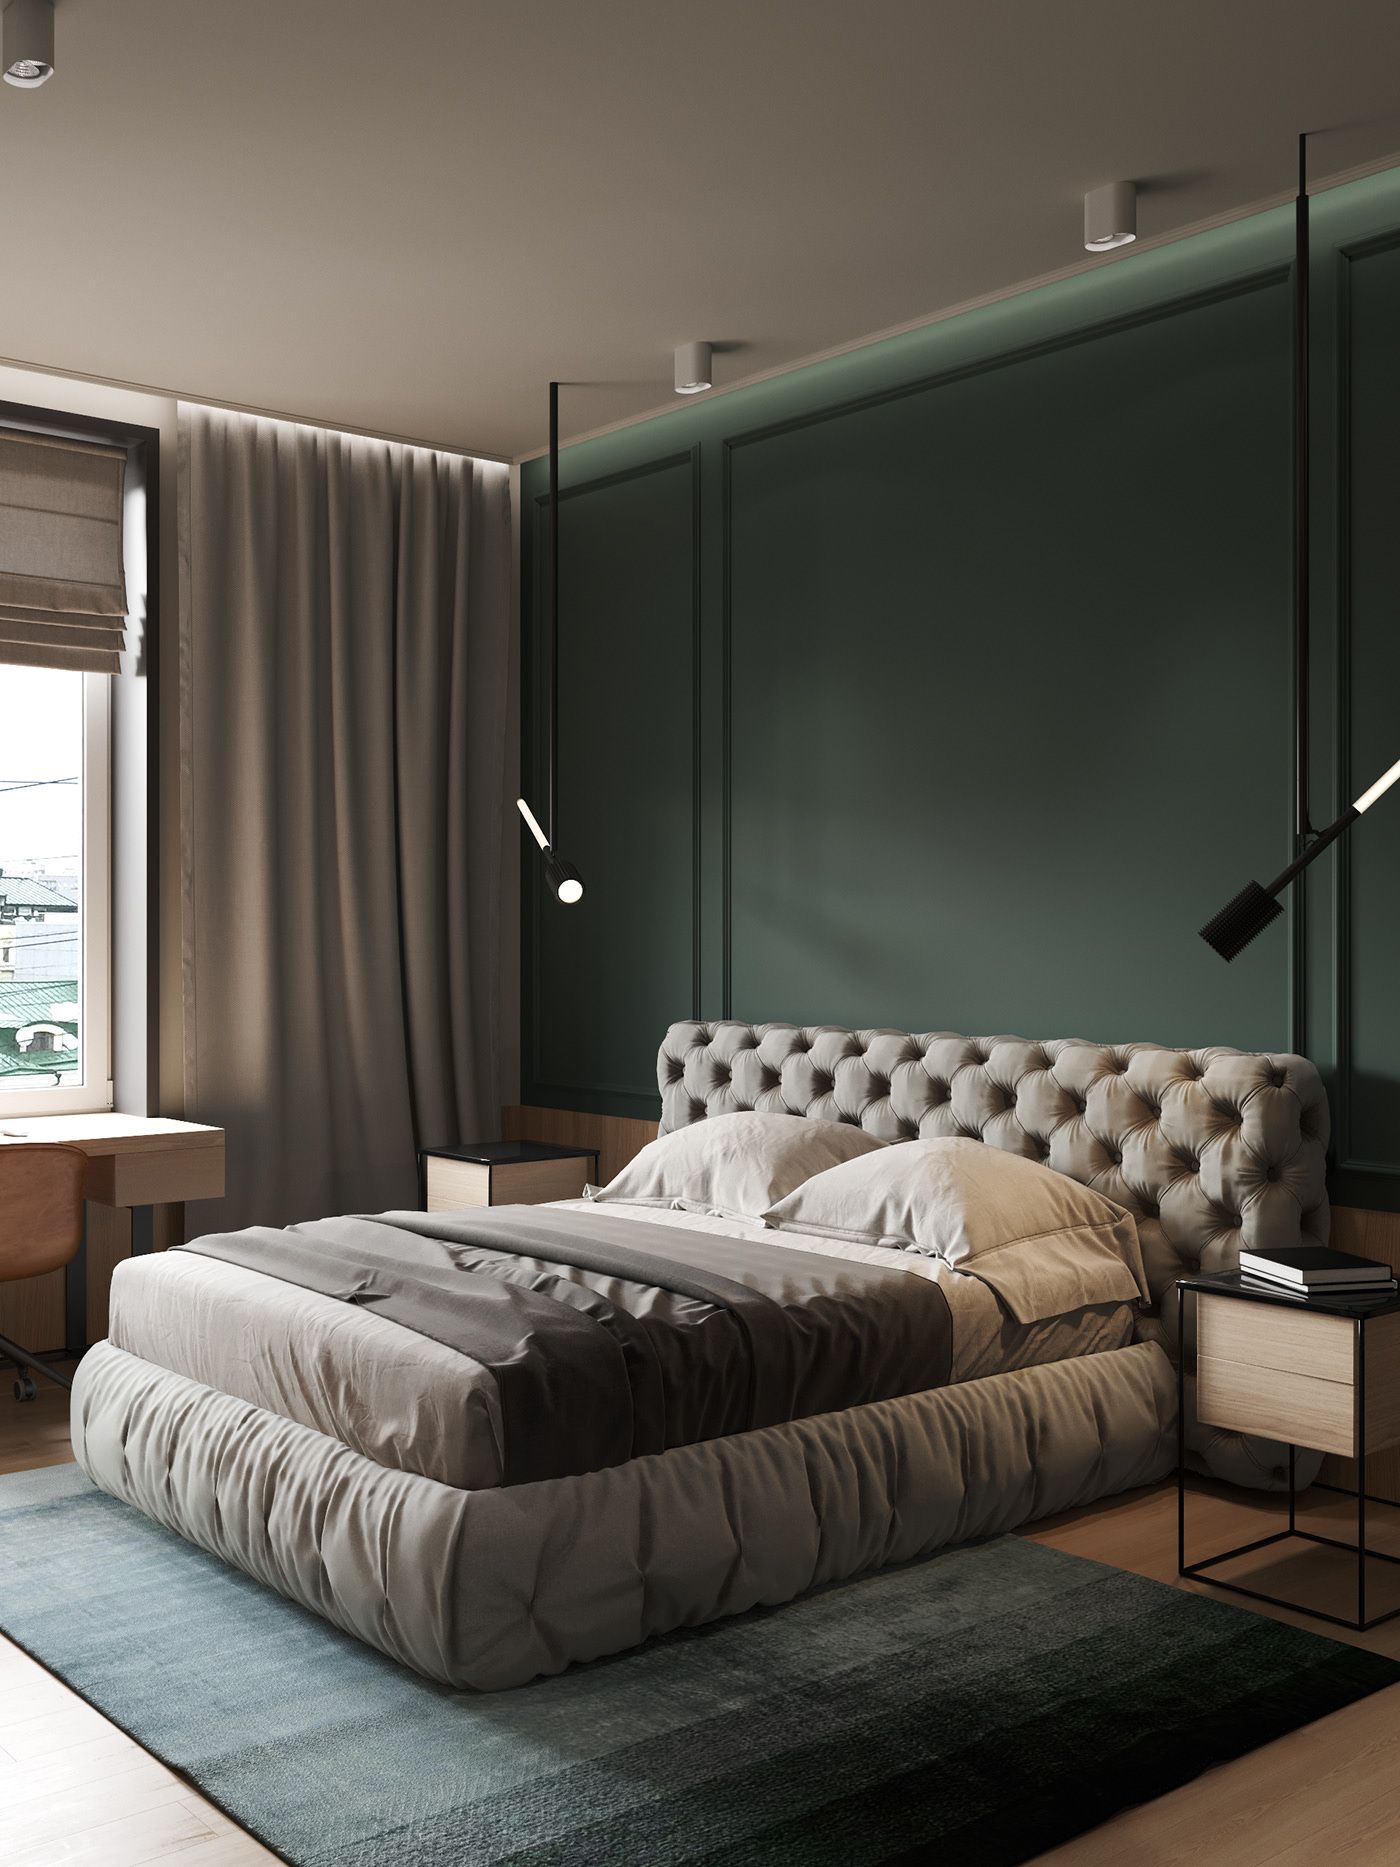 The Bold Green Wall and Grey Color for A Charming Look